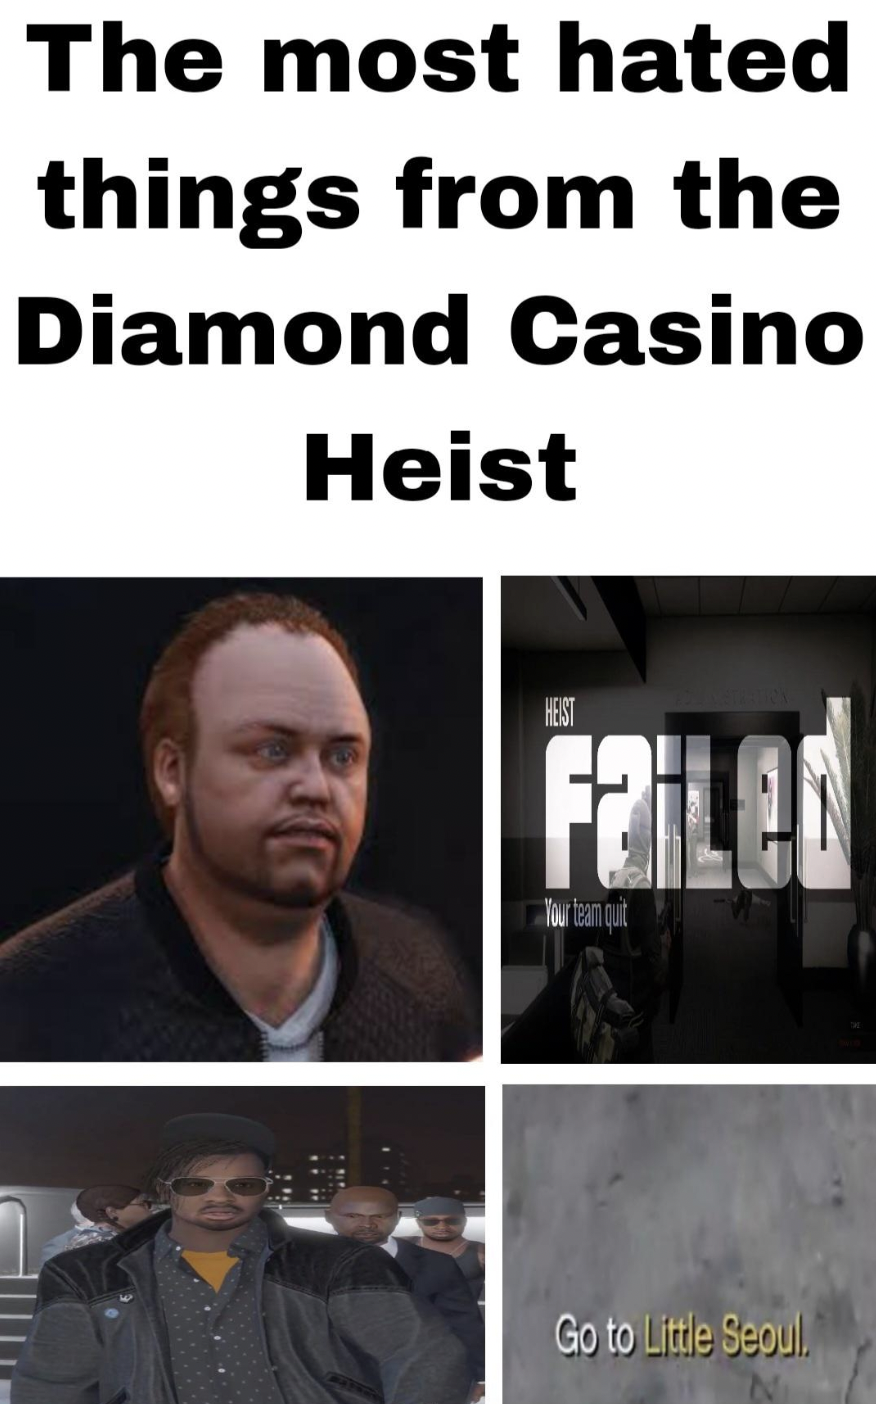 GTA V Memes - proceed with caution - The most hated things from the Diamond Casino Heist Hem Failed Go to Little Seoul.